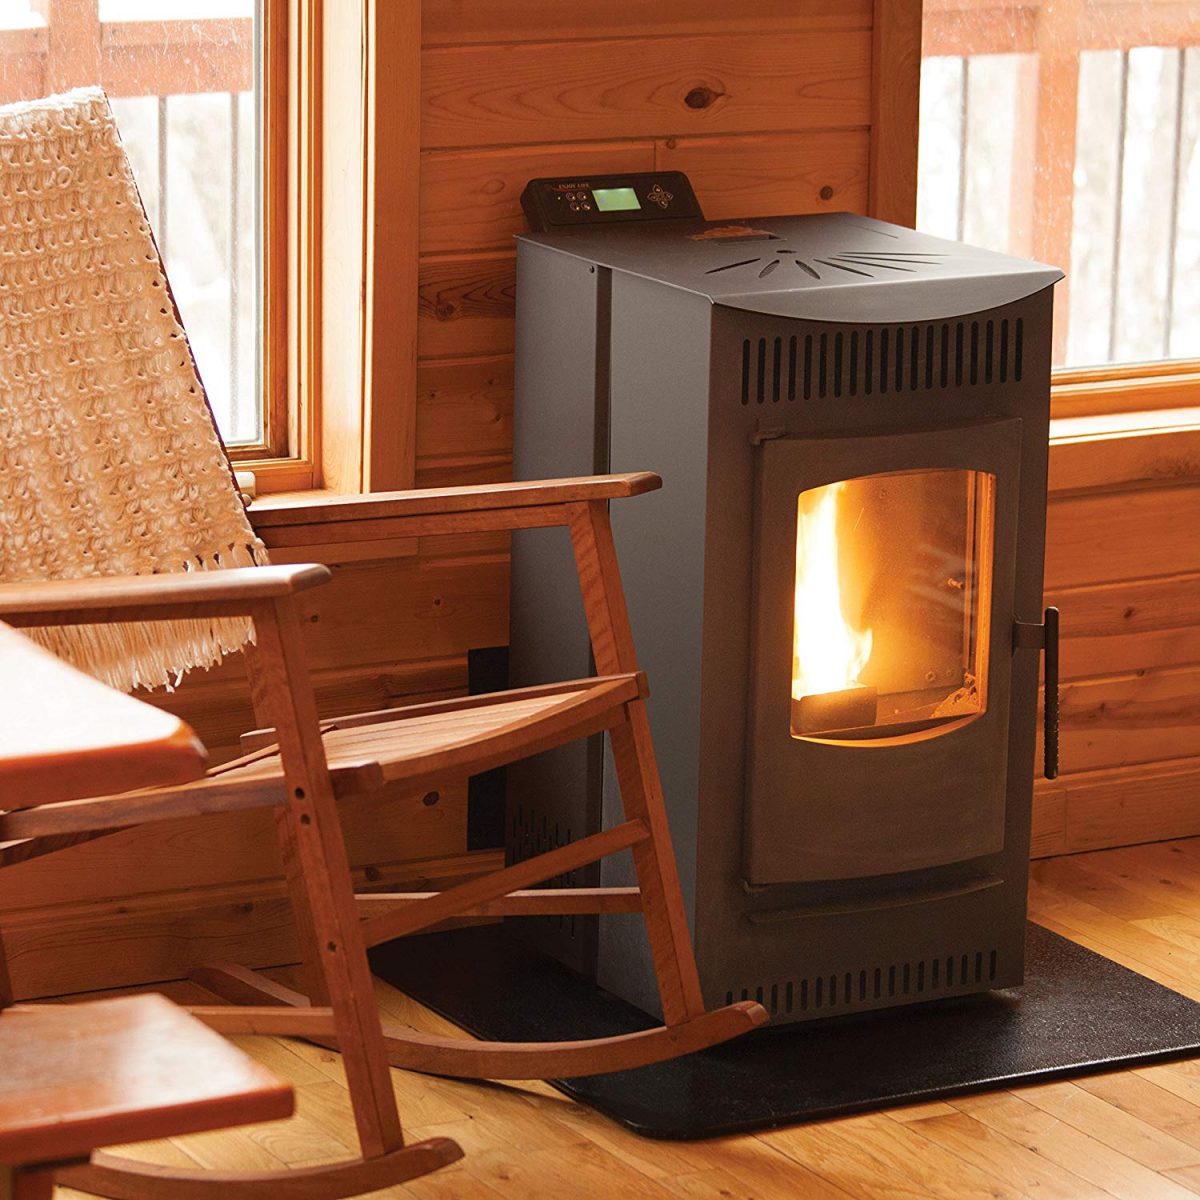 Top 10 Pellet Stoves To Make You Warm At Home Storables